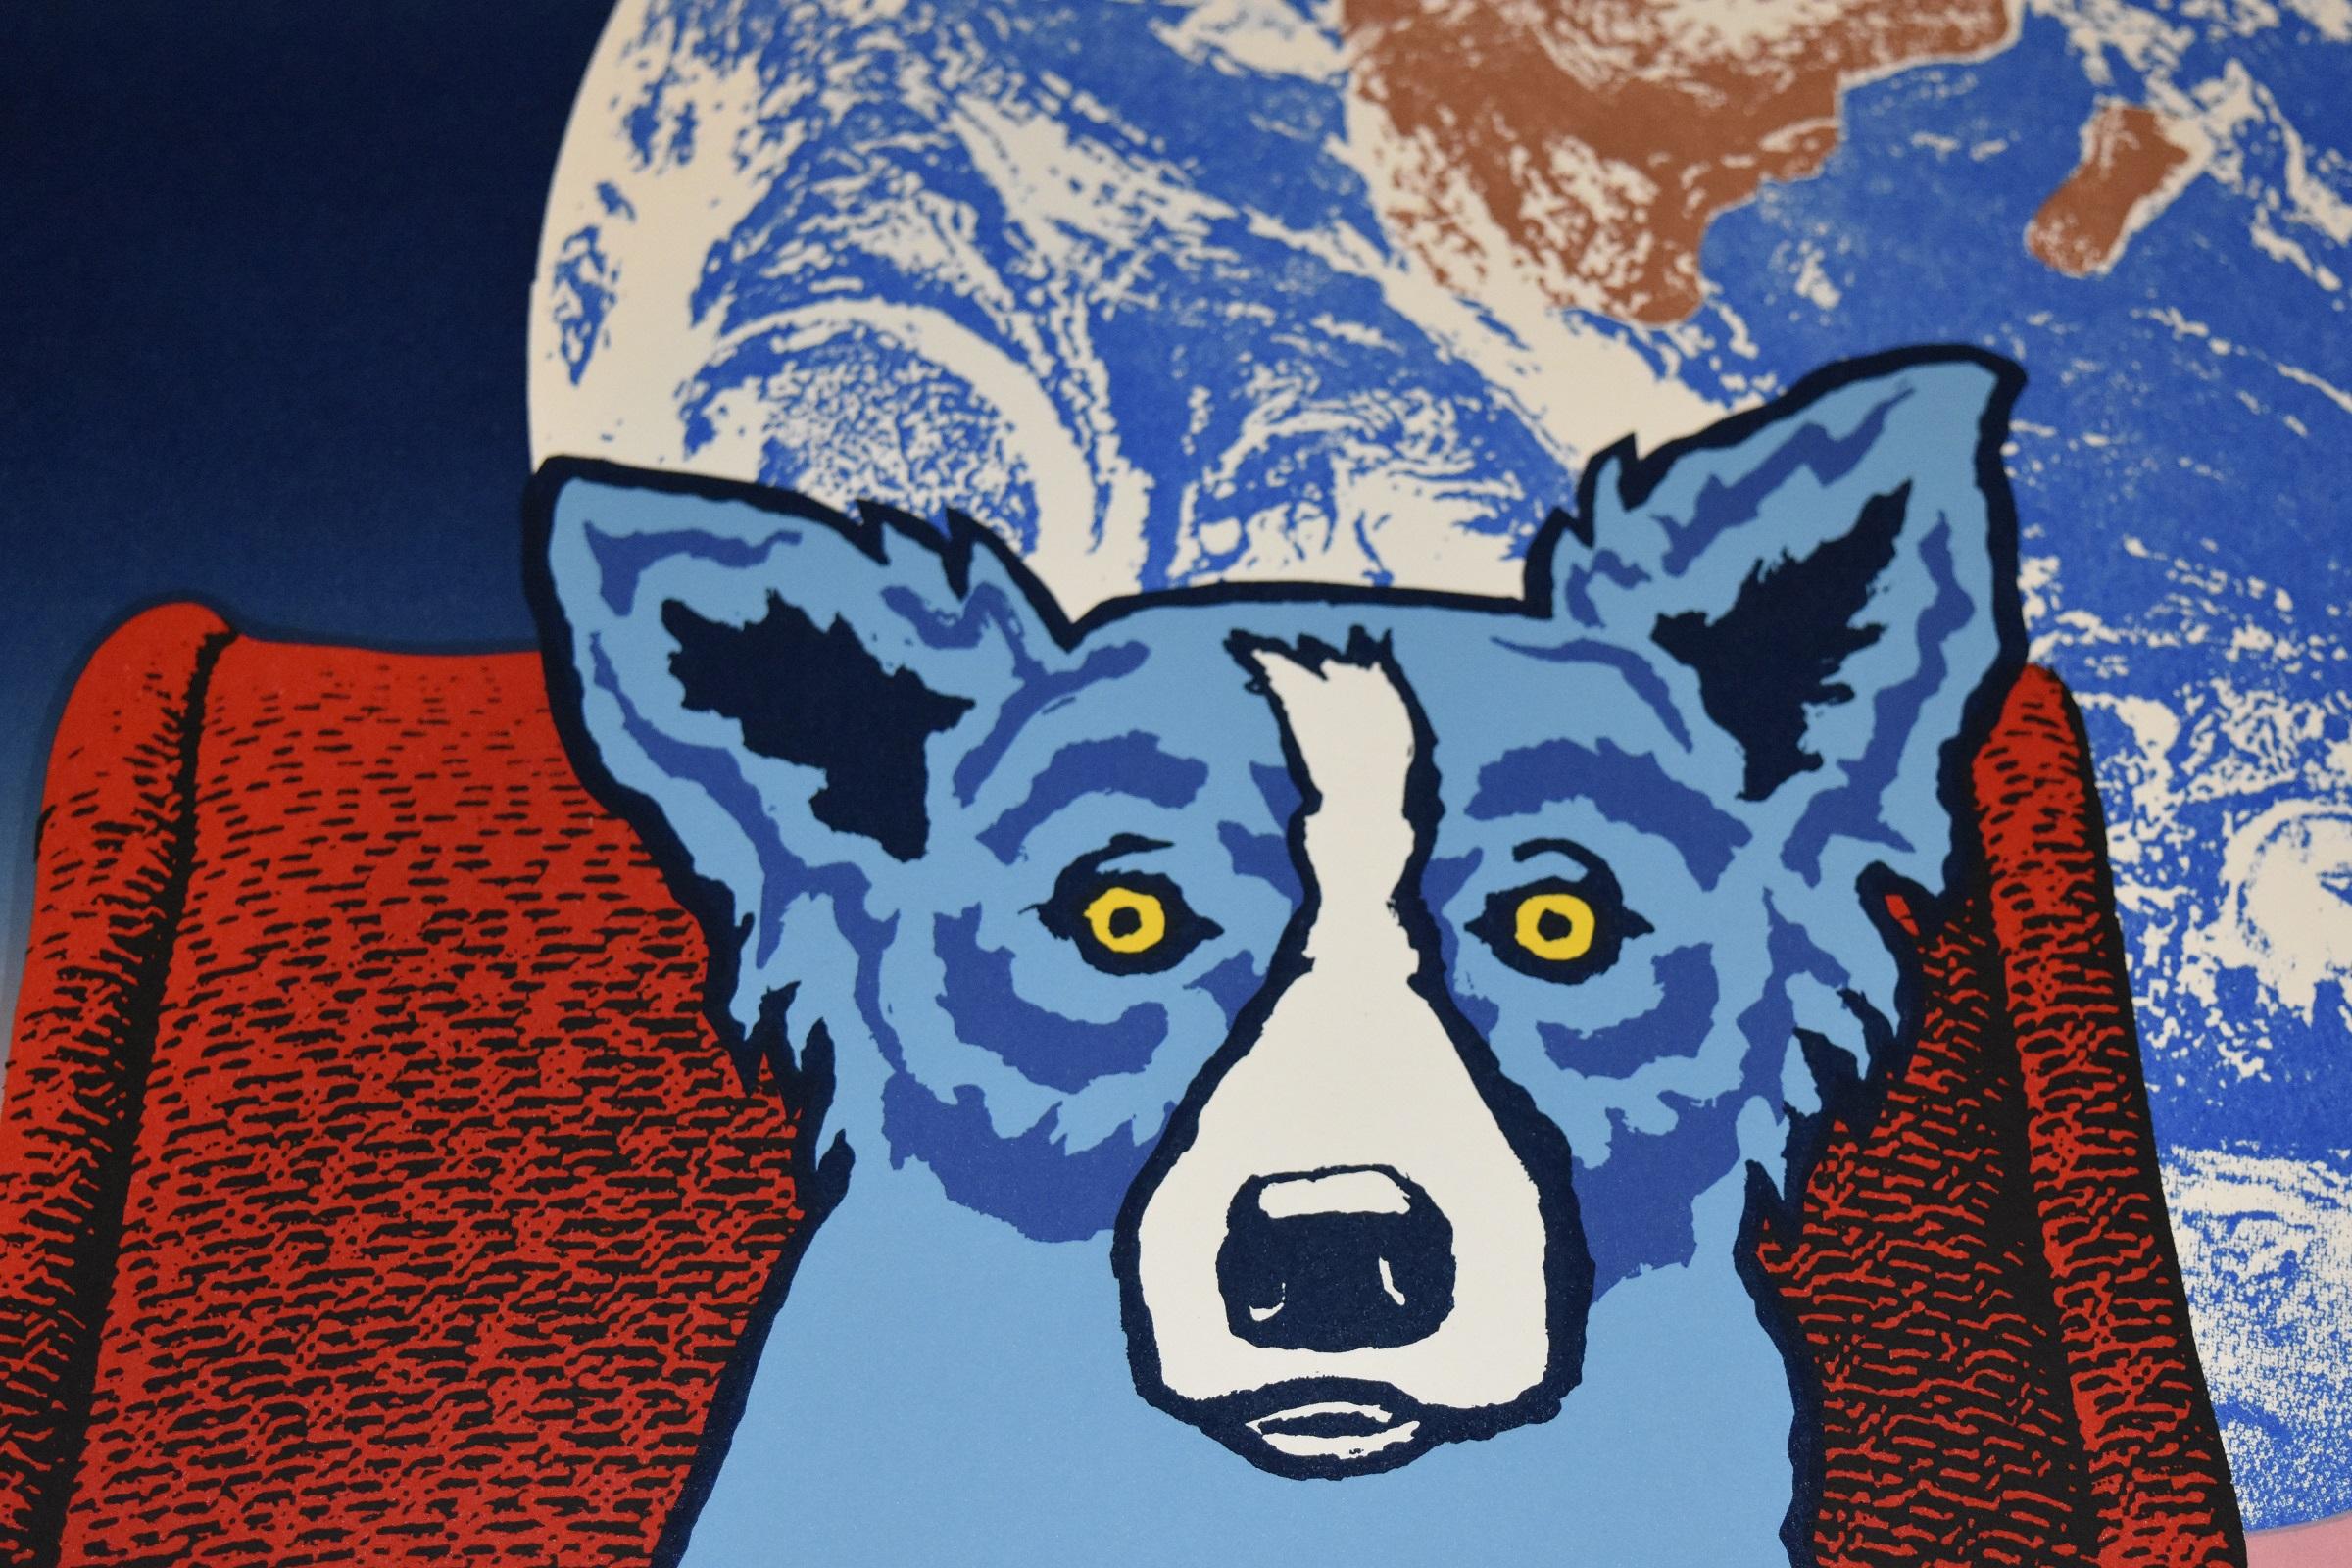 This Blue Dog work consists of a dark blue fading into 2 shades of pink background and a dog sitting on a dark red chair in front of earth.  The dog has soulful yellow eyes.  This pop art animal original silkscreen print on paper is guaranteed